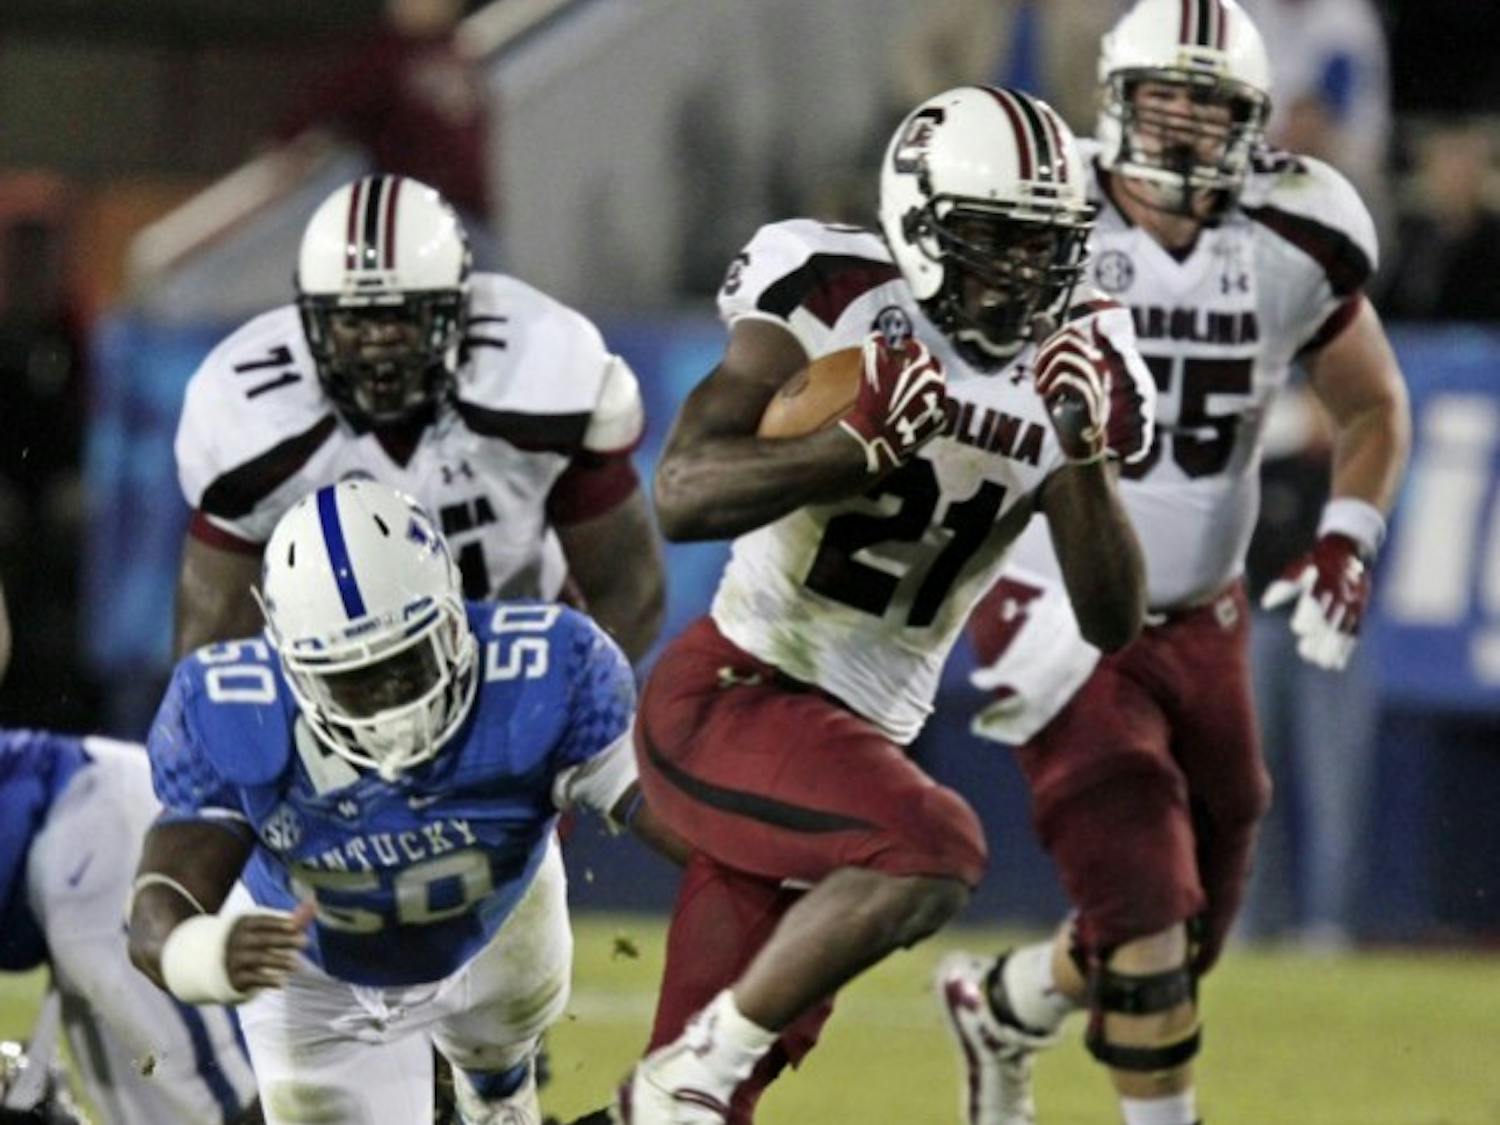 South Carolina tailback Marcus Lattimore (21) runs away from Kentucky's Mike Douglas (50) during the second half of an NCAA college football game in Lexington, Ky., on Sept. 29. Then No. 6 South Carolina came from behind to beat Kentucky 38-17.